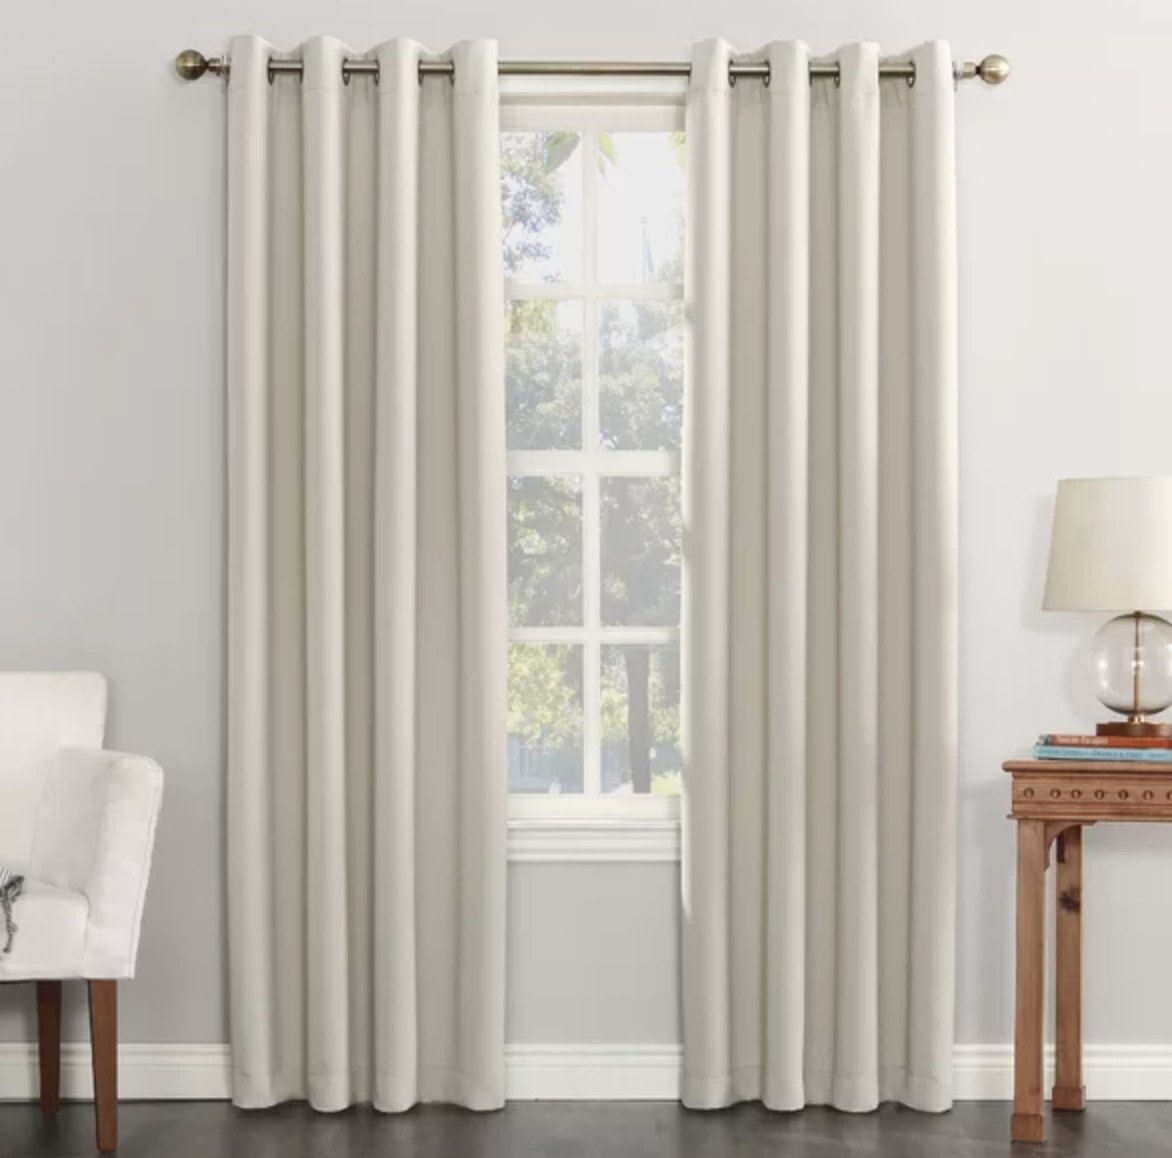 the curtain panels in white